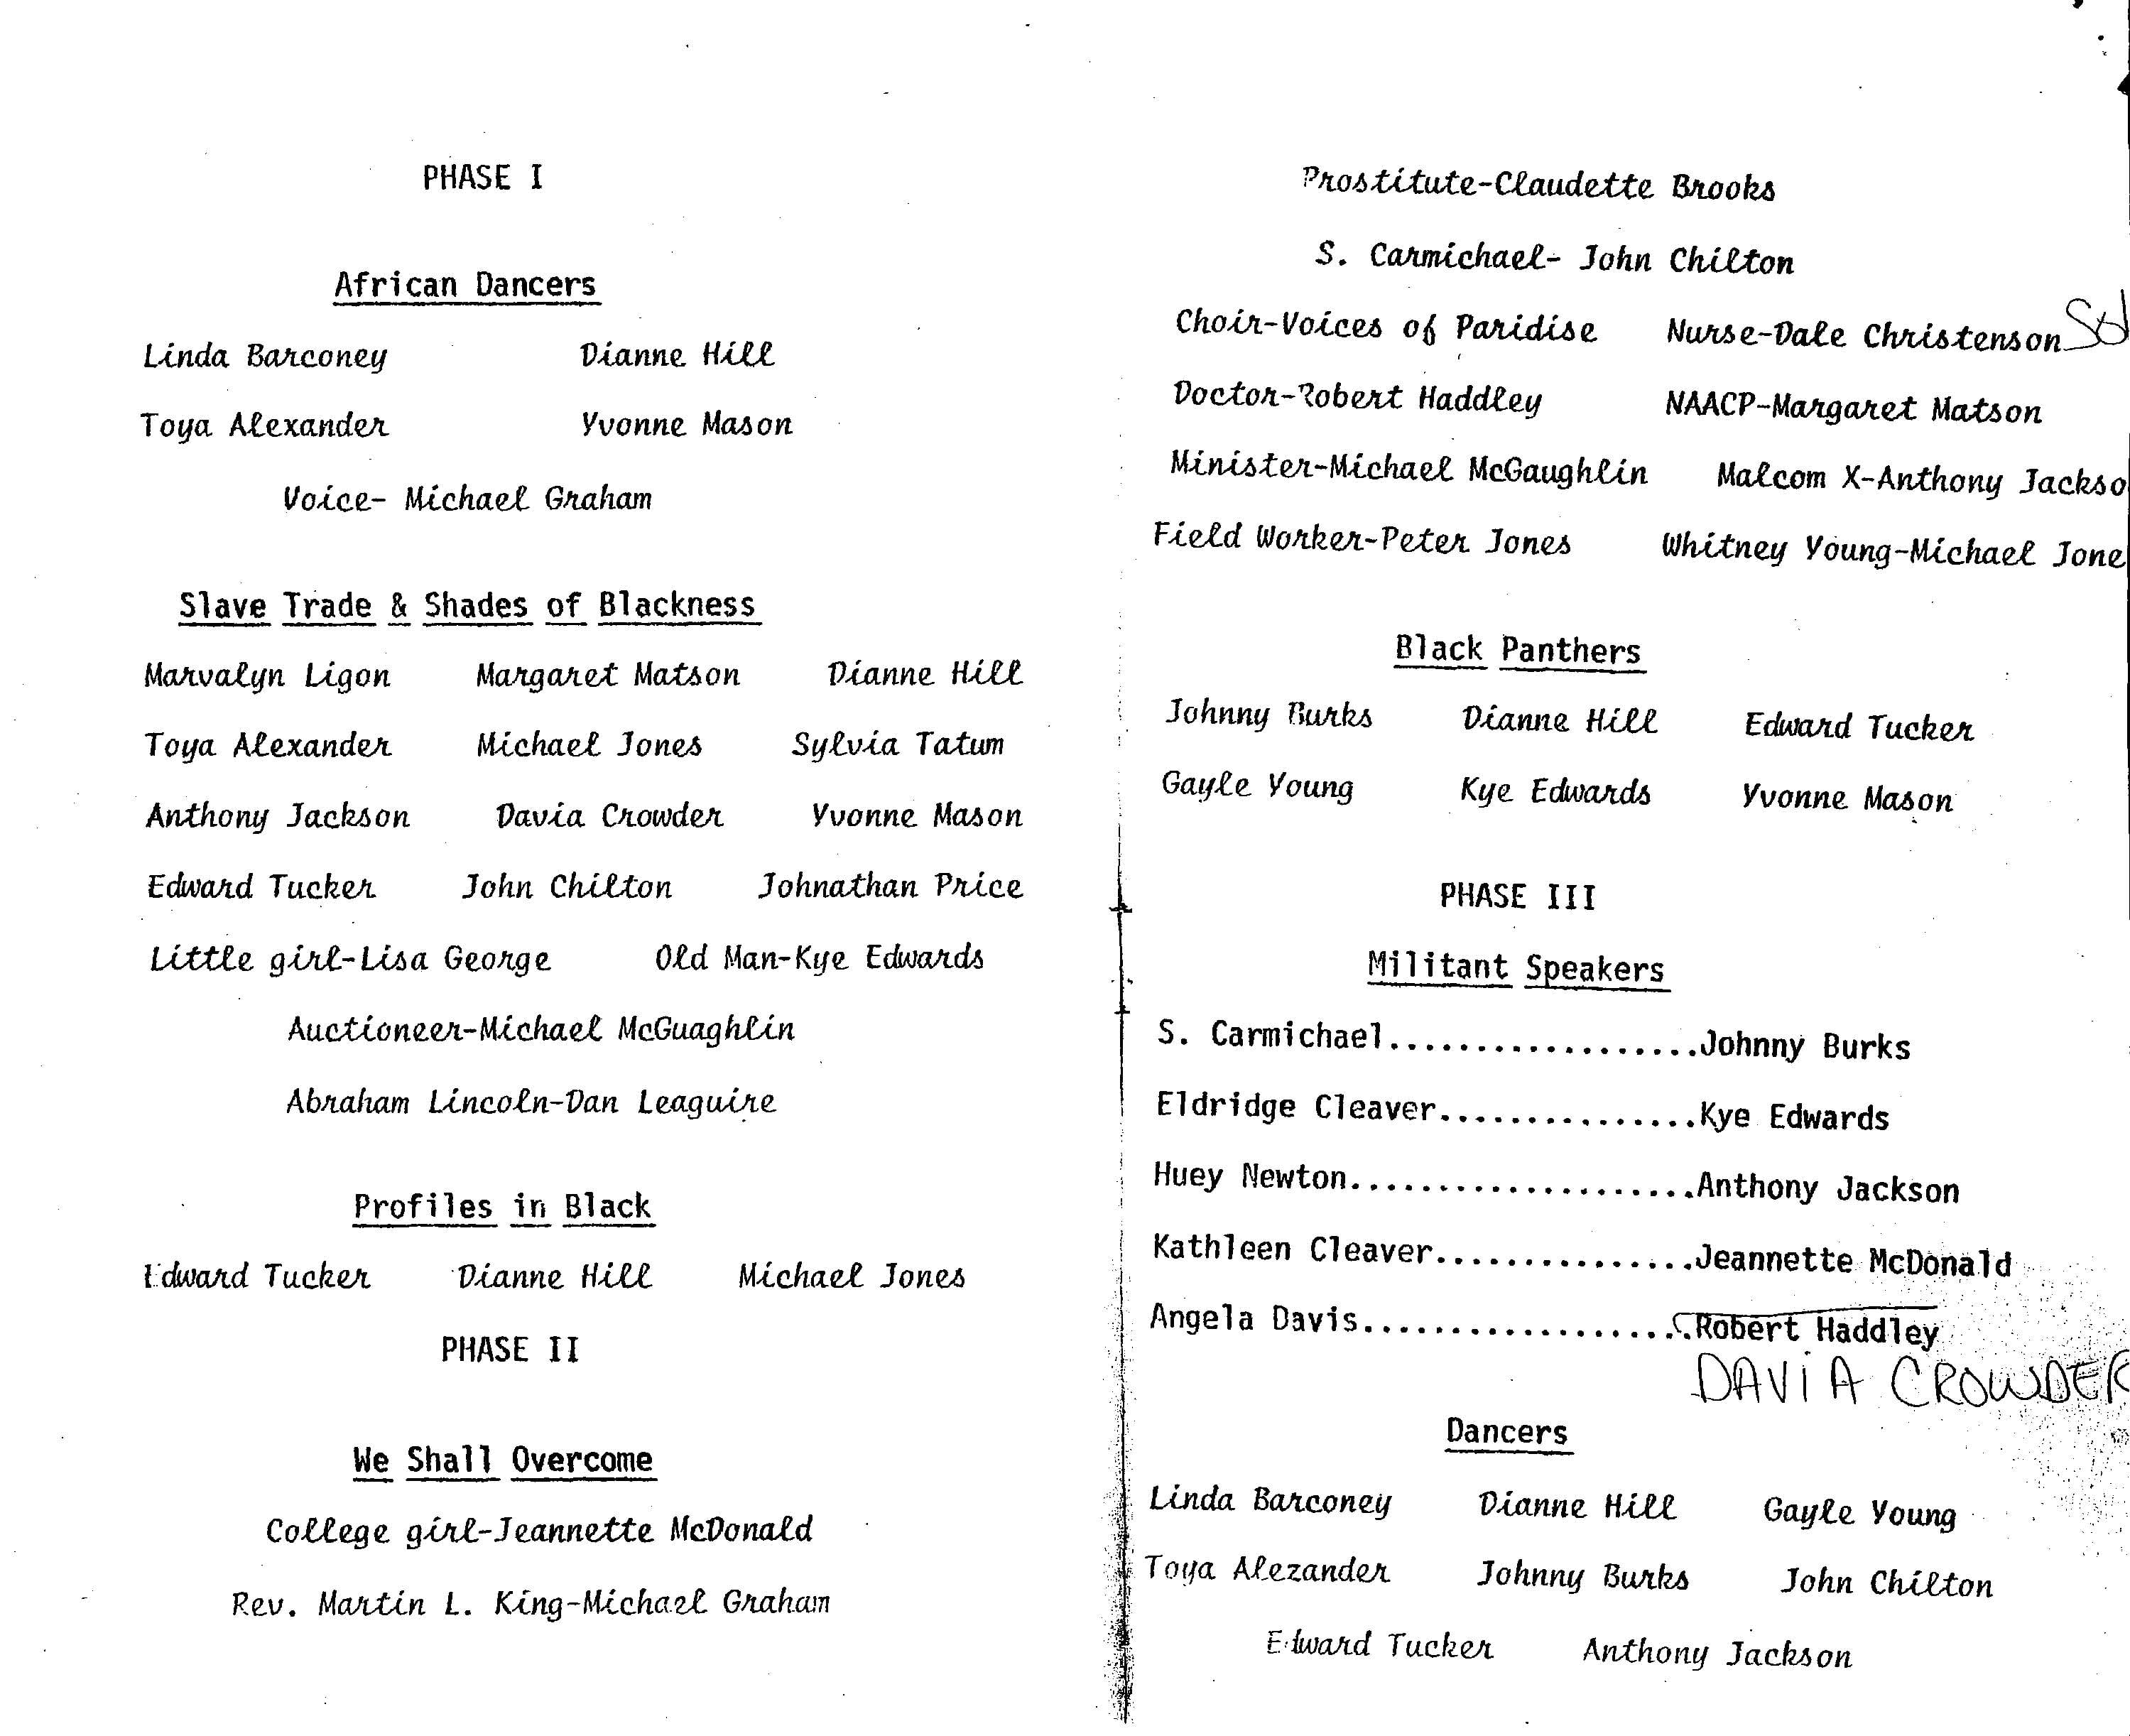 Playbill of the cast for a production of "The Three Phases of the Black Man" (1972)